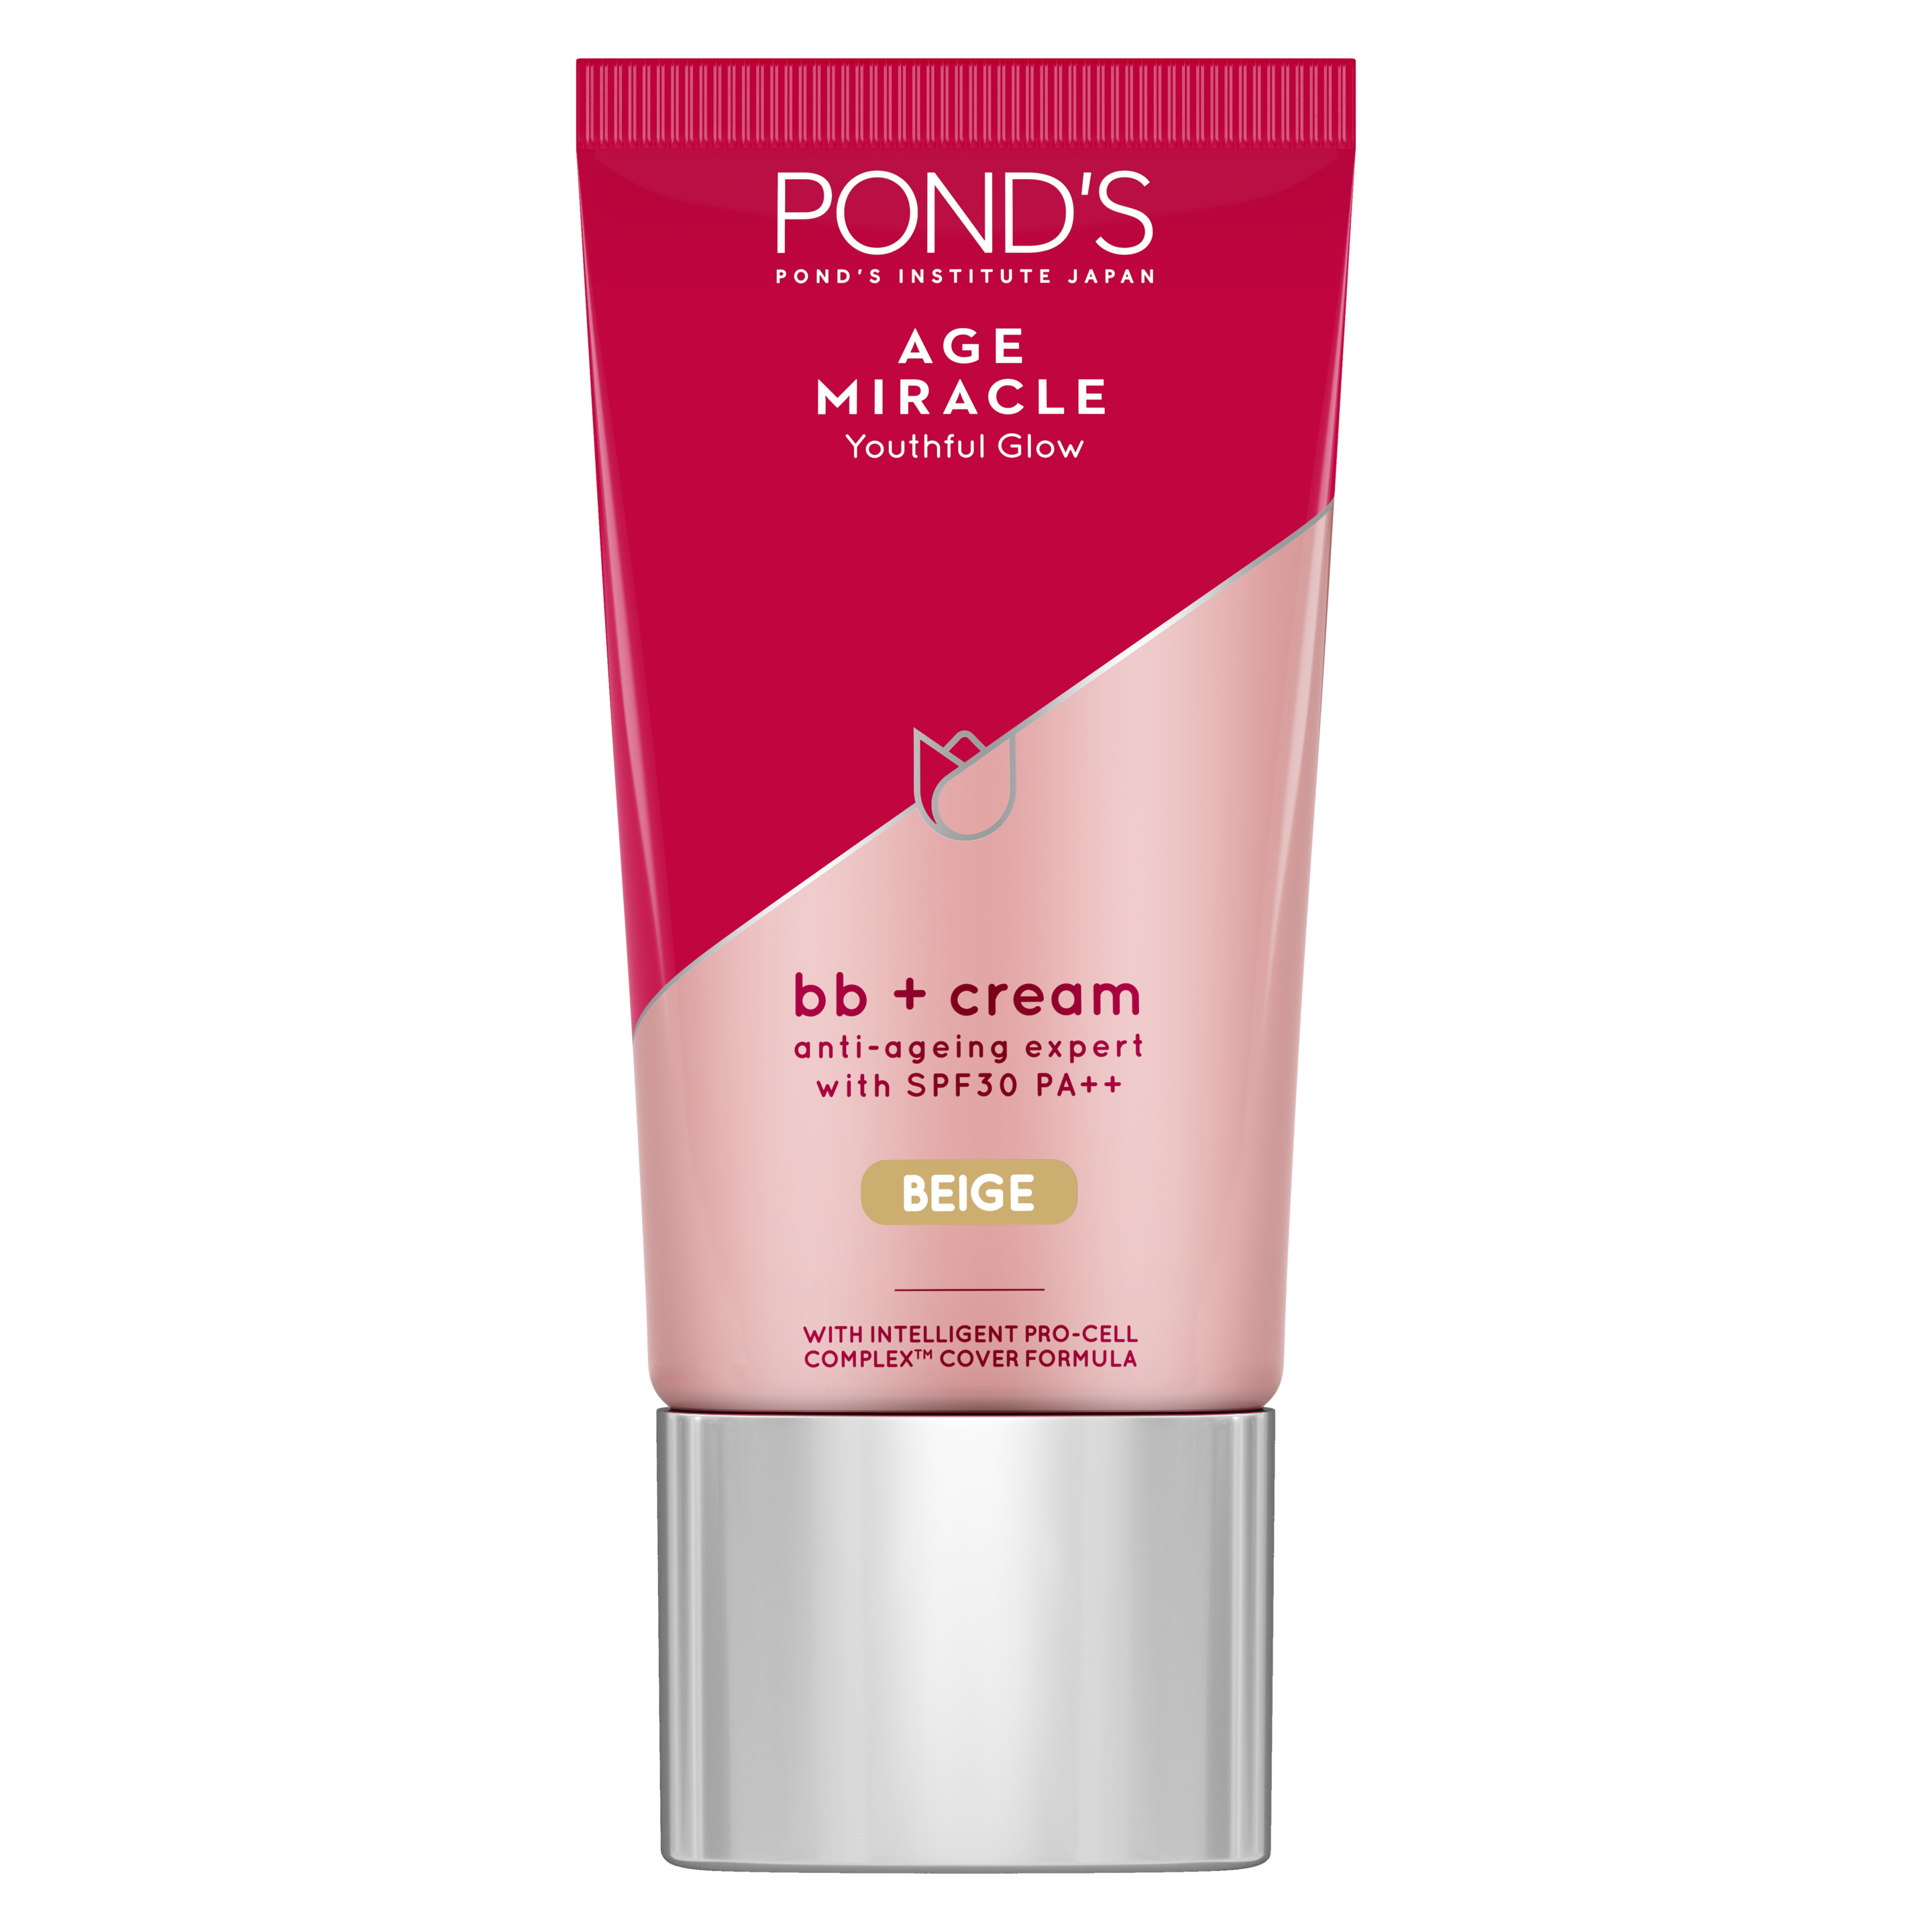 Pond's Age Miracle BB Cream - Biege